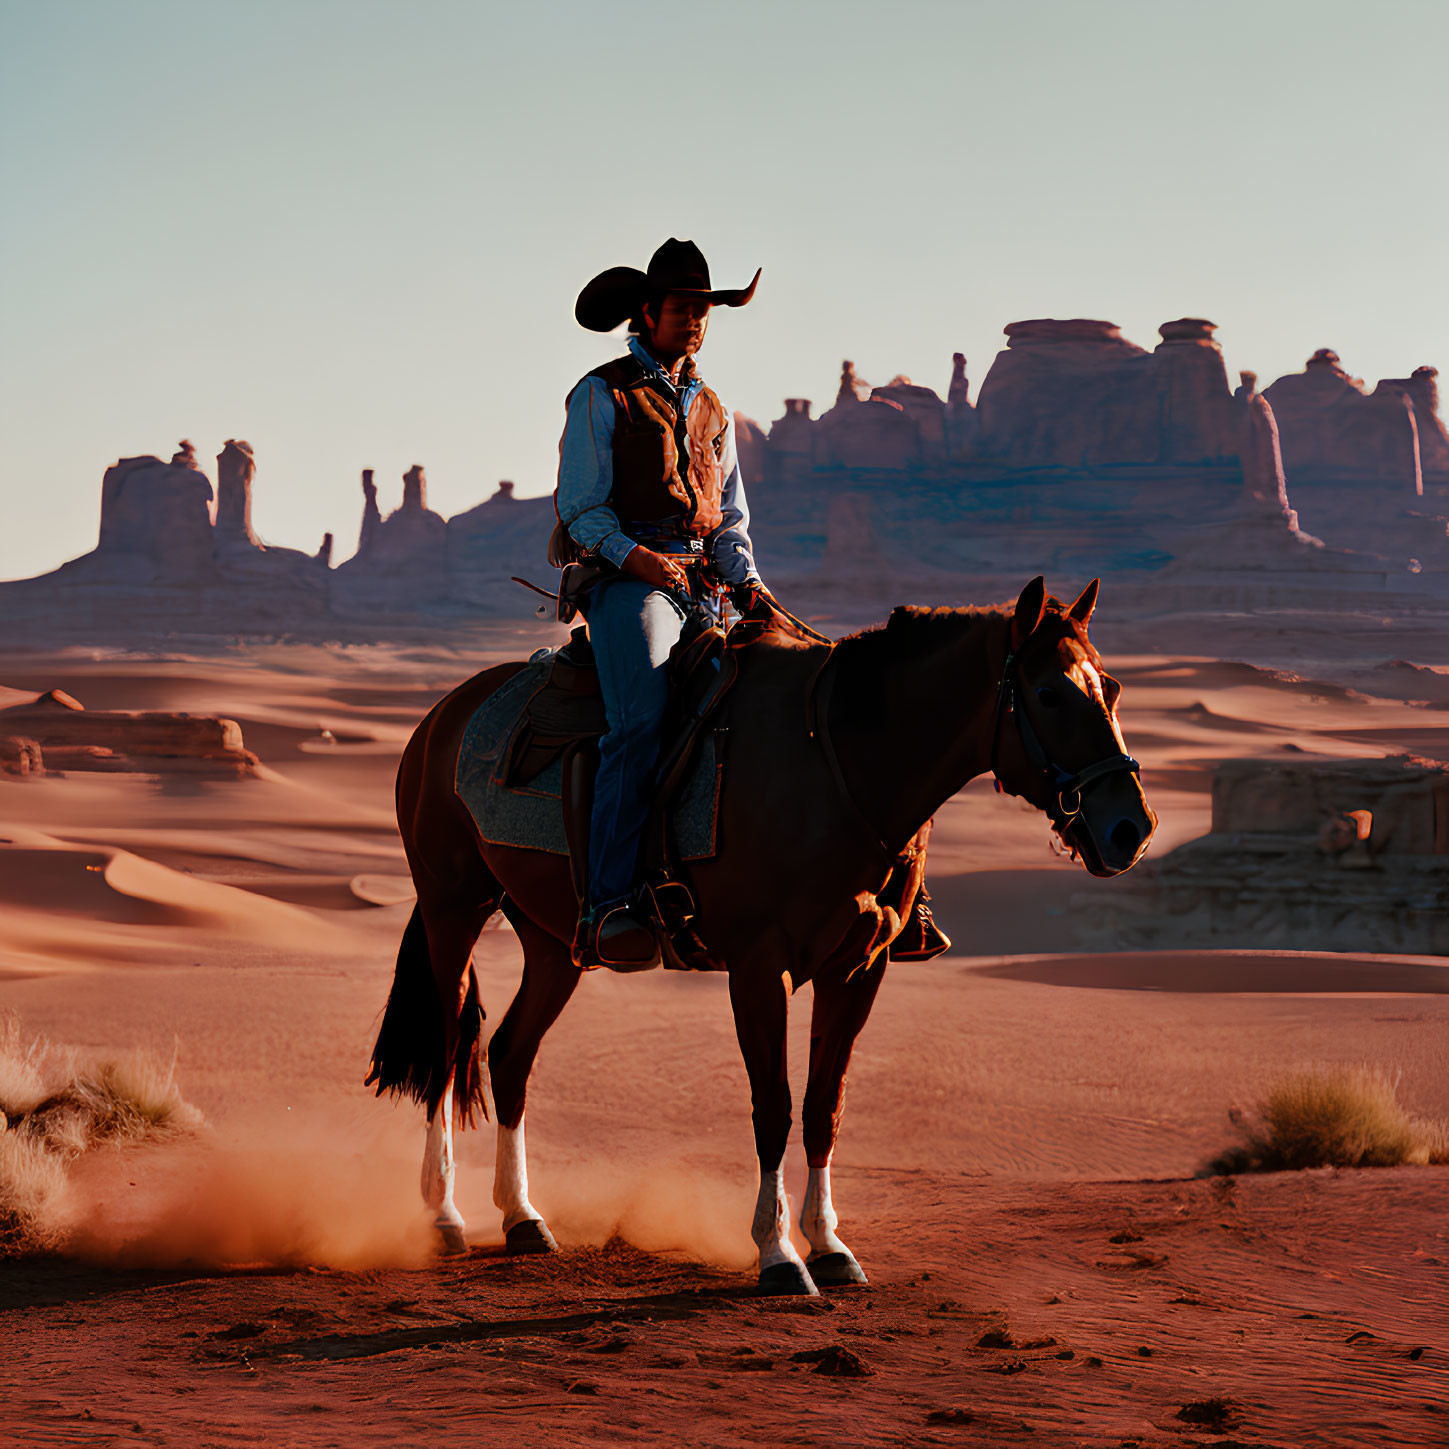 Cowboy on horseback in desert with rock formations at sunset